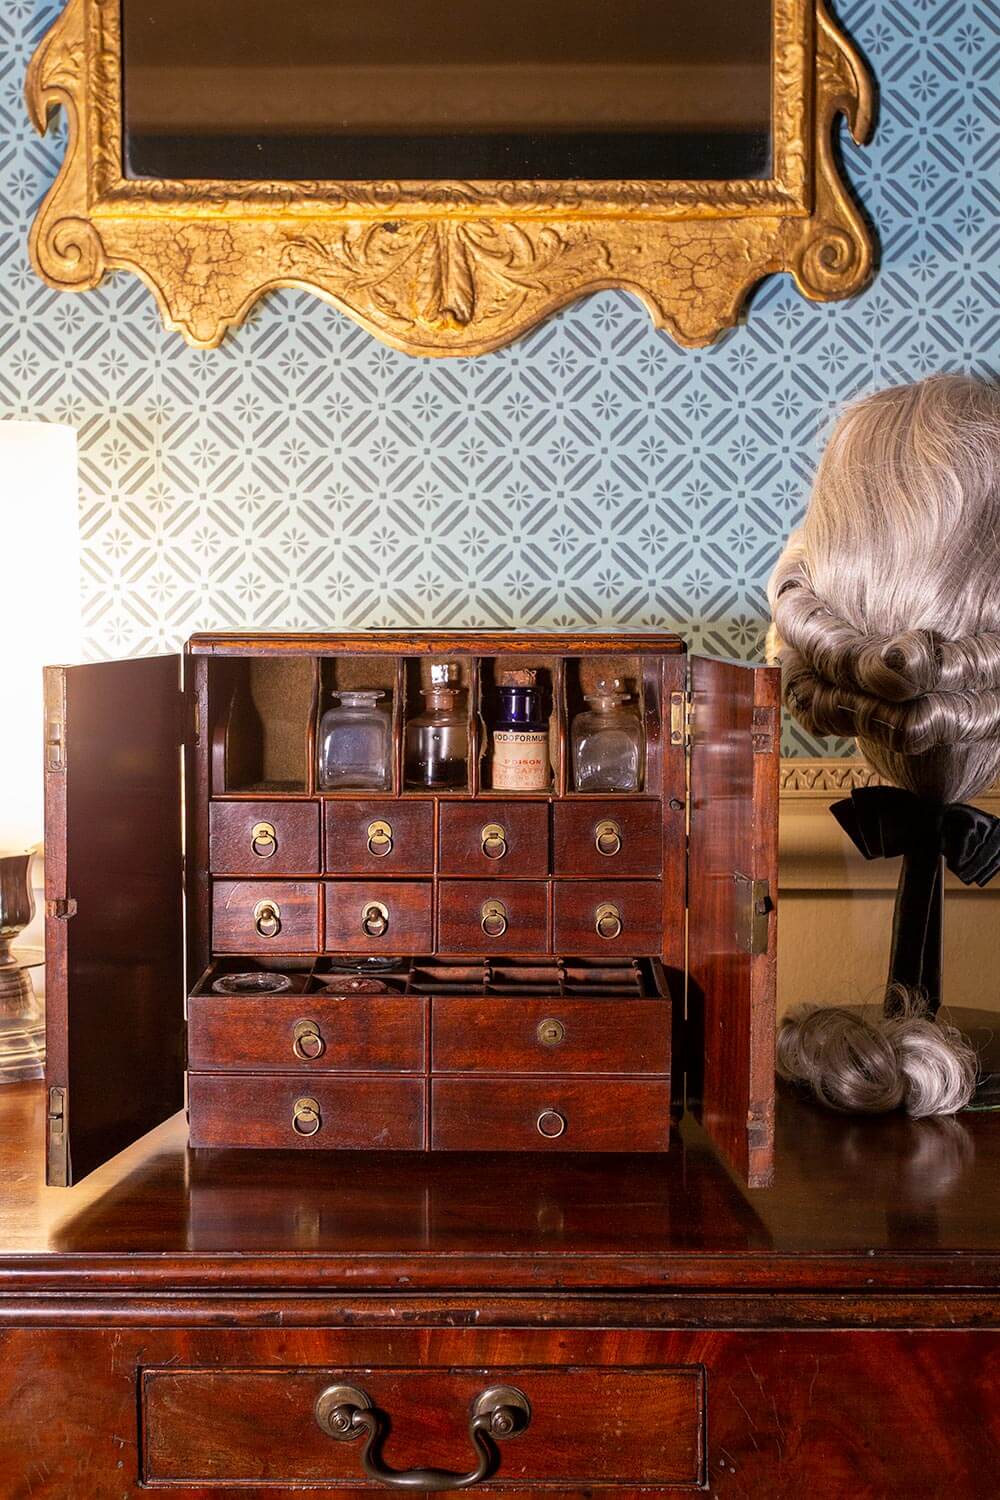 Medicine chests like these were common in domestic homes. Ours seen here, is currently in storage.